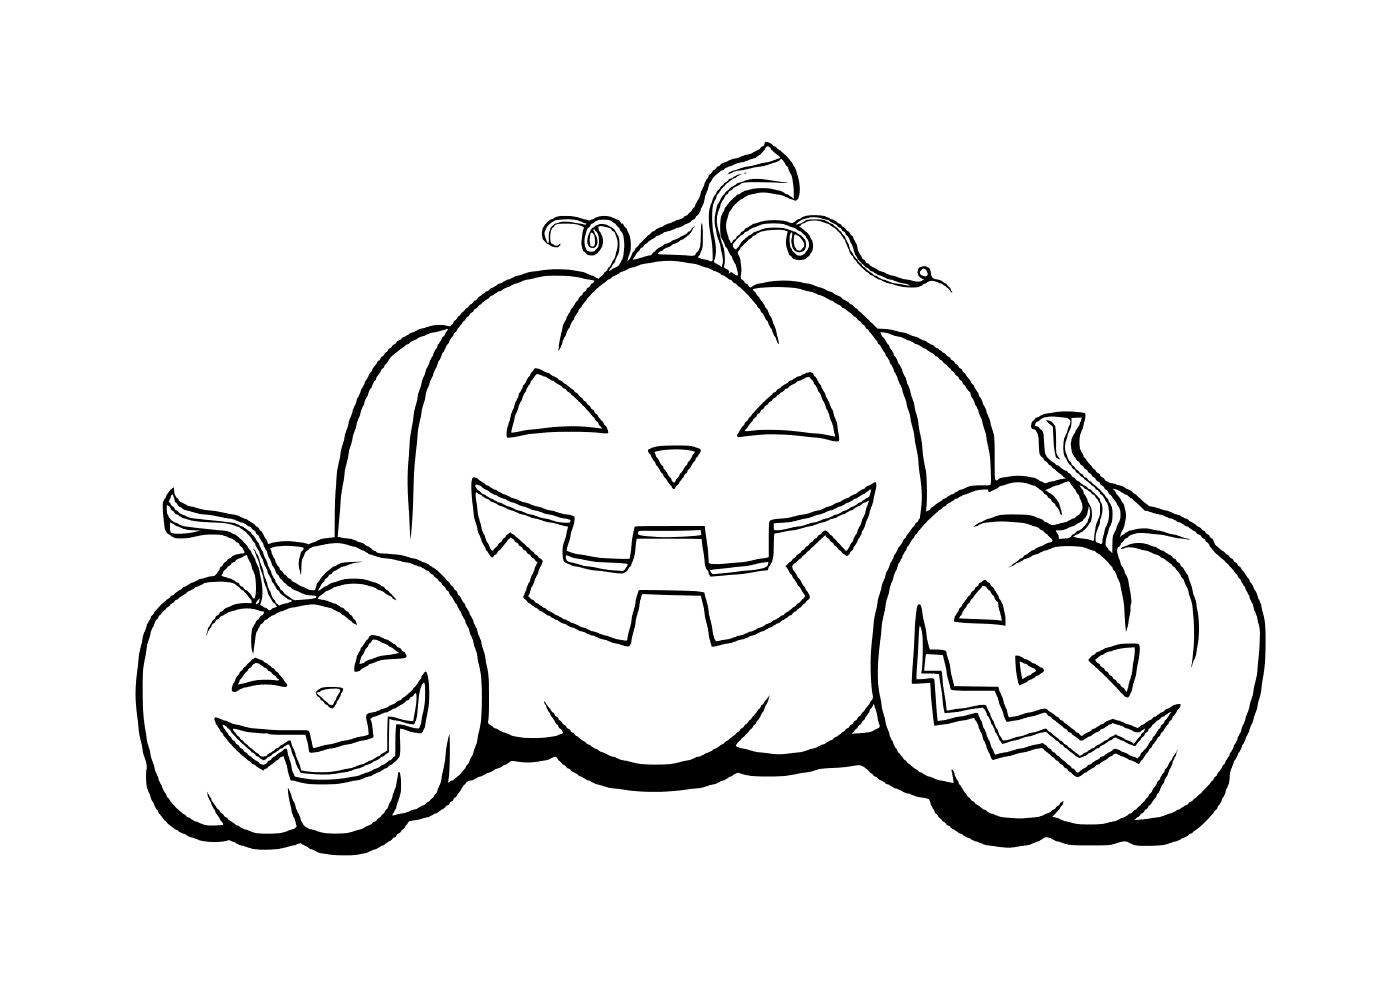  Three pumpkins from the curcubitaceae family 